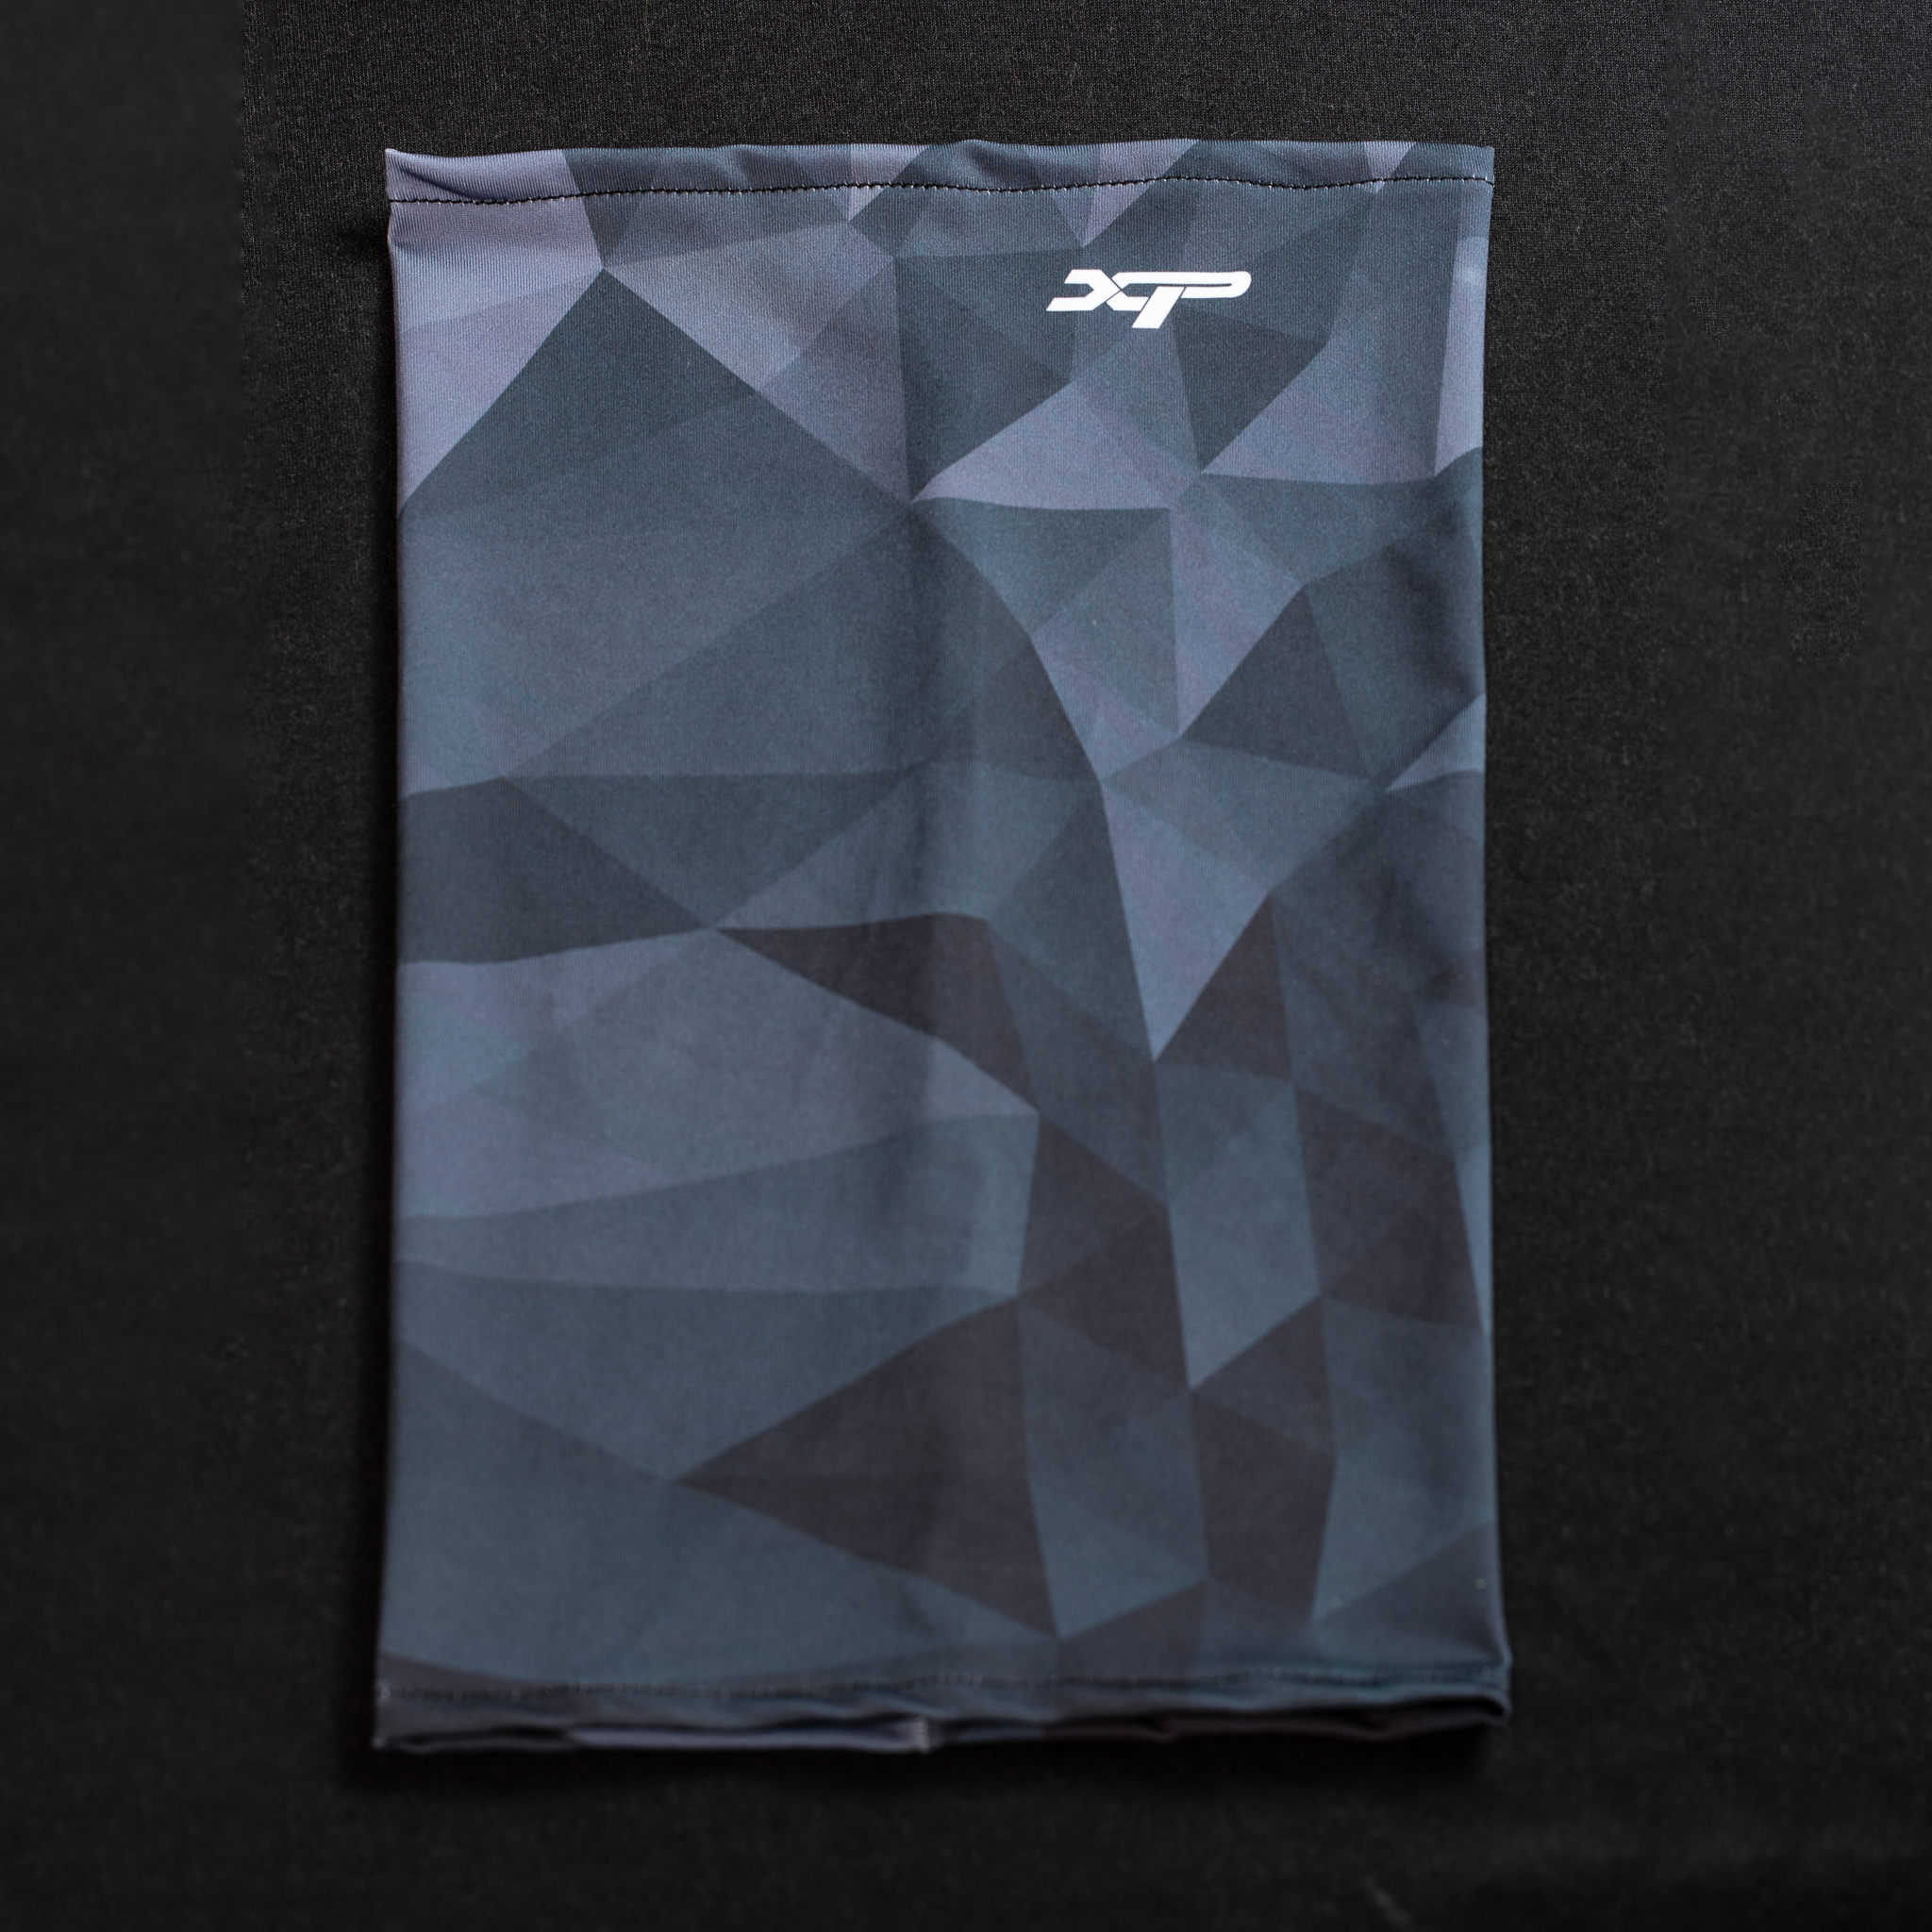 Sublimated Antimicrobial Neck Gaiter in Black Xtreme Pro Apparel